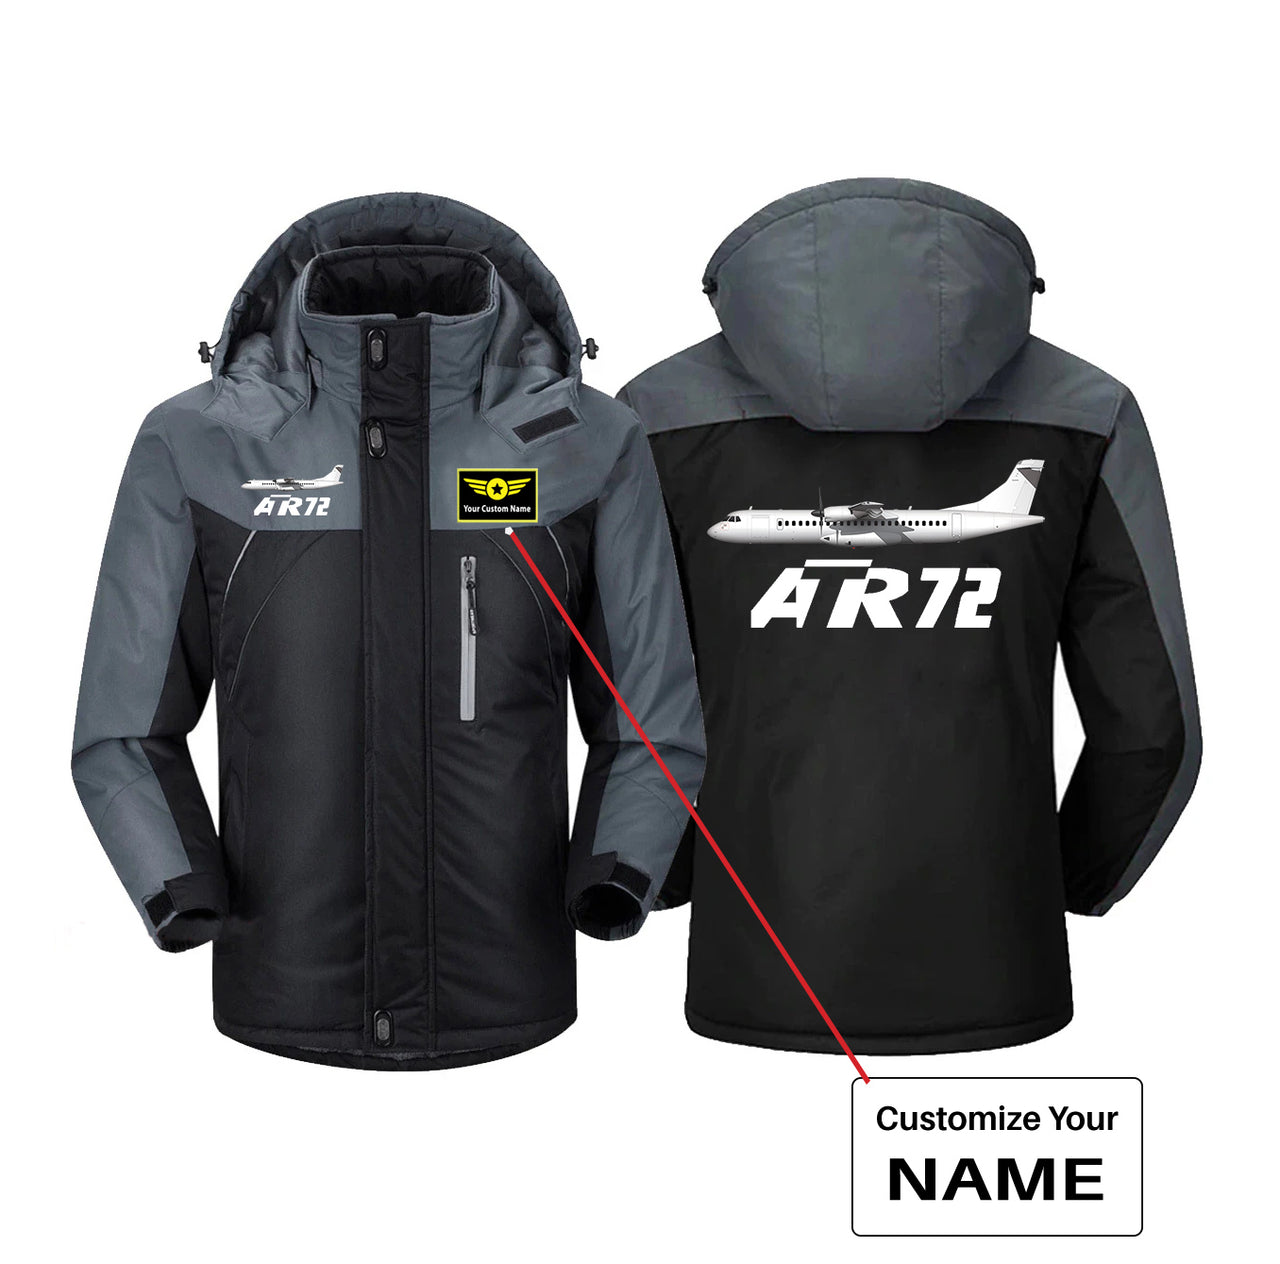 The ATR72 Designed Thick Winter Jackets